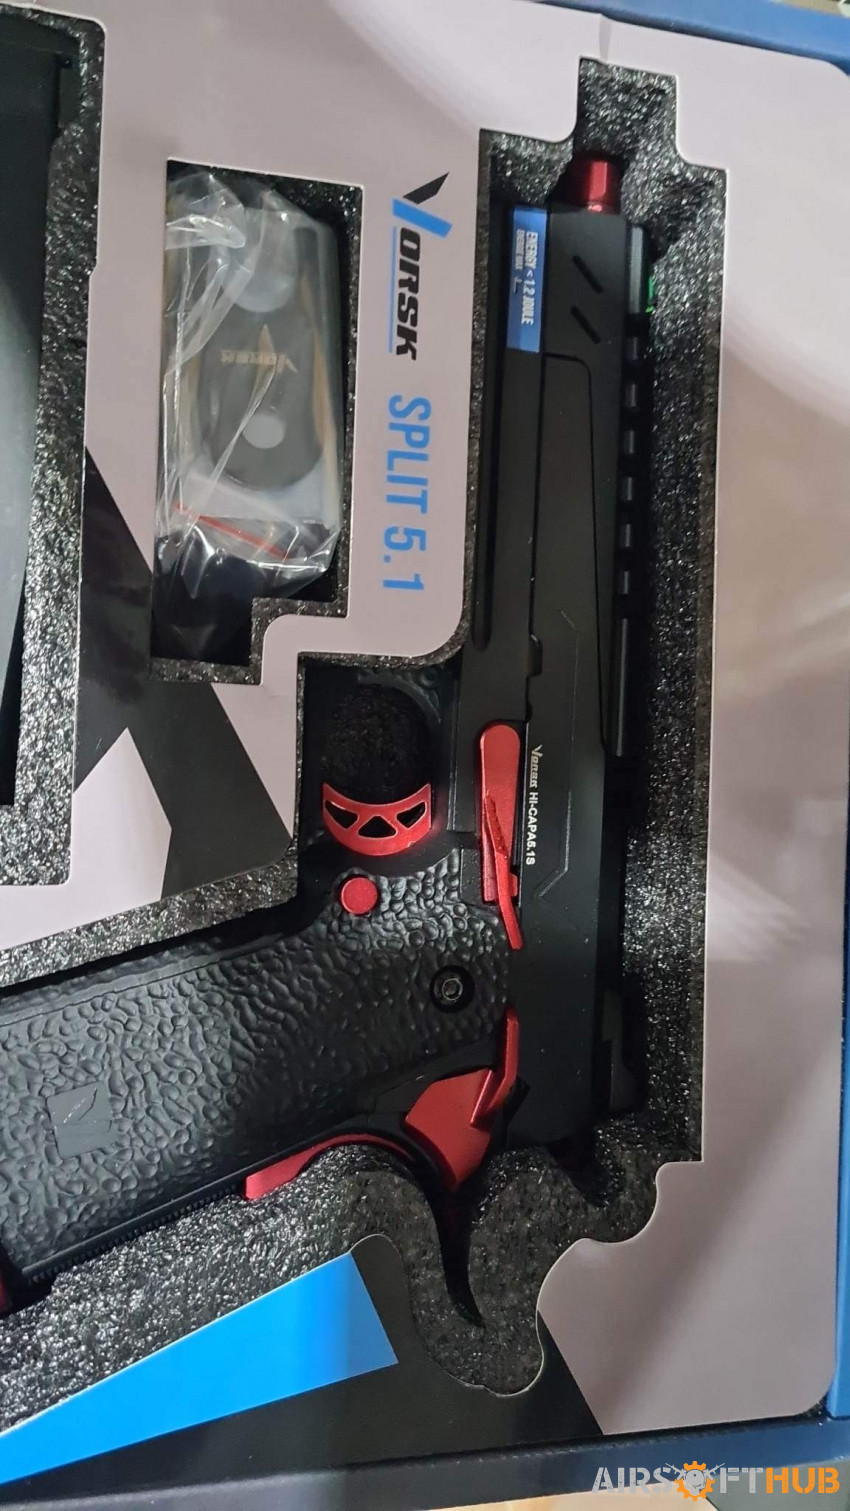 For sale all brand new pistols - Used airsoft equipment